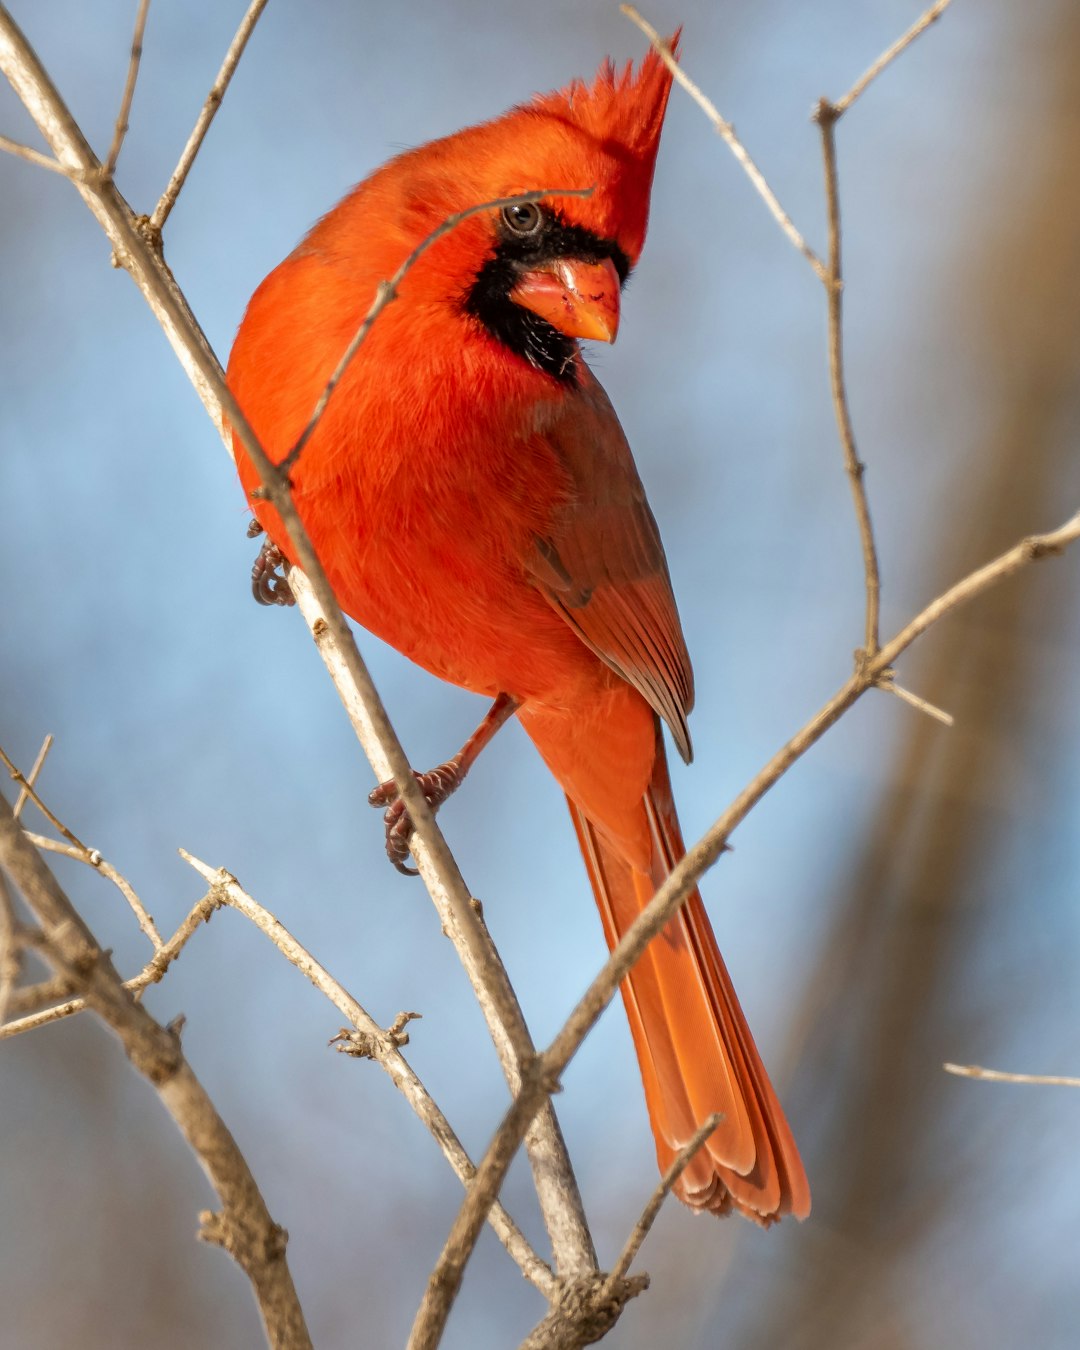 red cardinal perched on brown tree branch during daytime